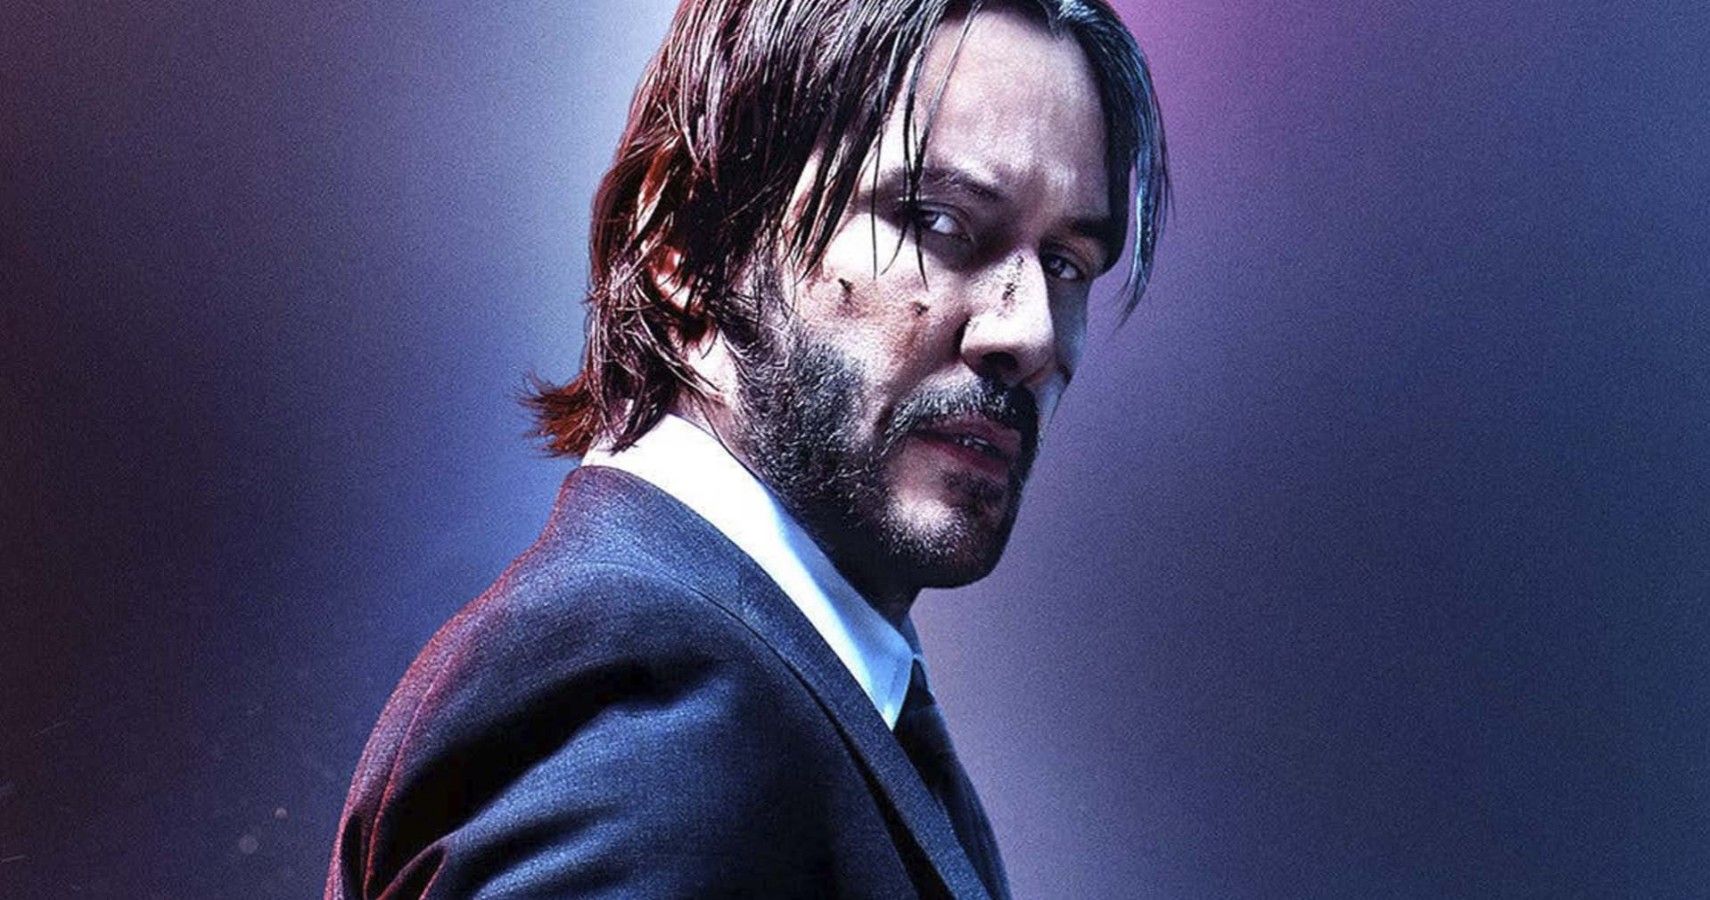 4. "The Evolution of John Wick's Blonde Hair" - wide 10